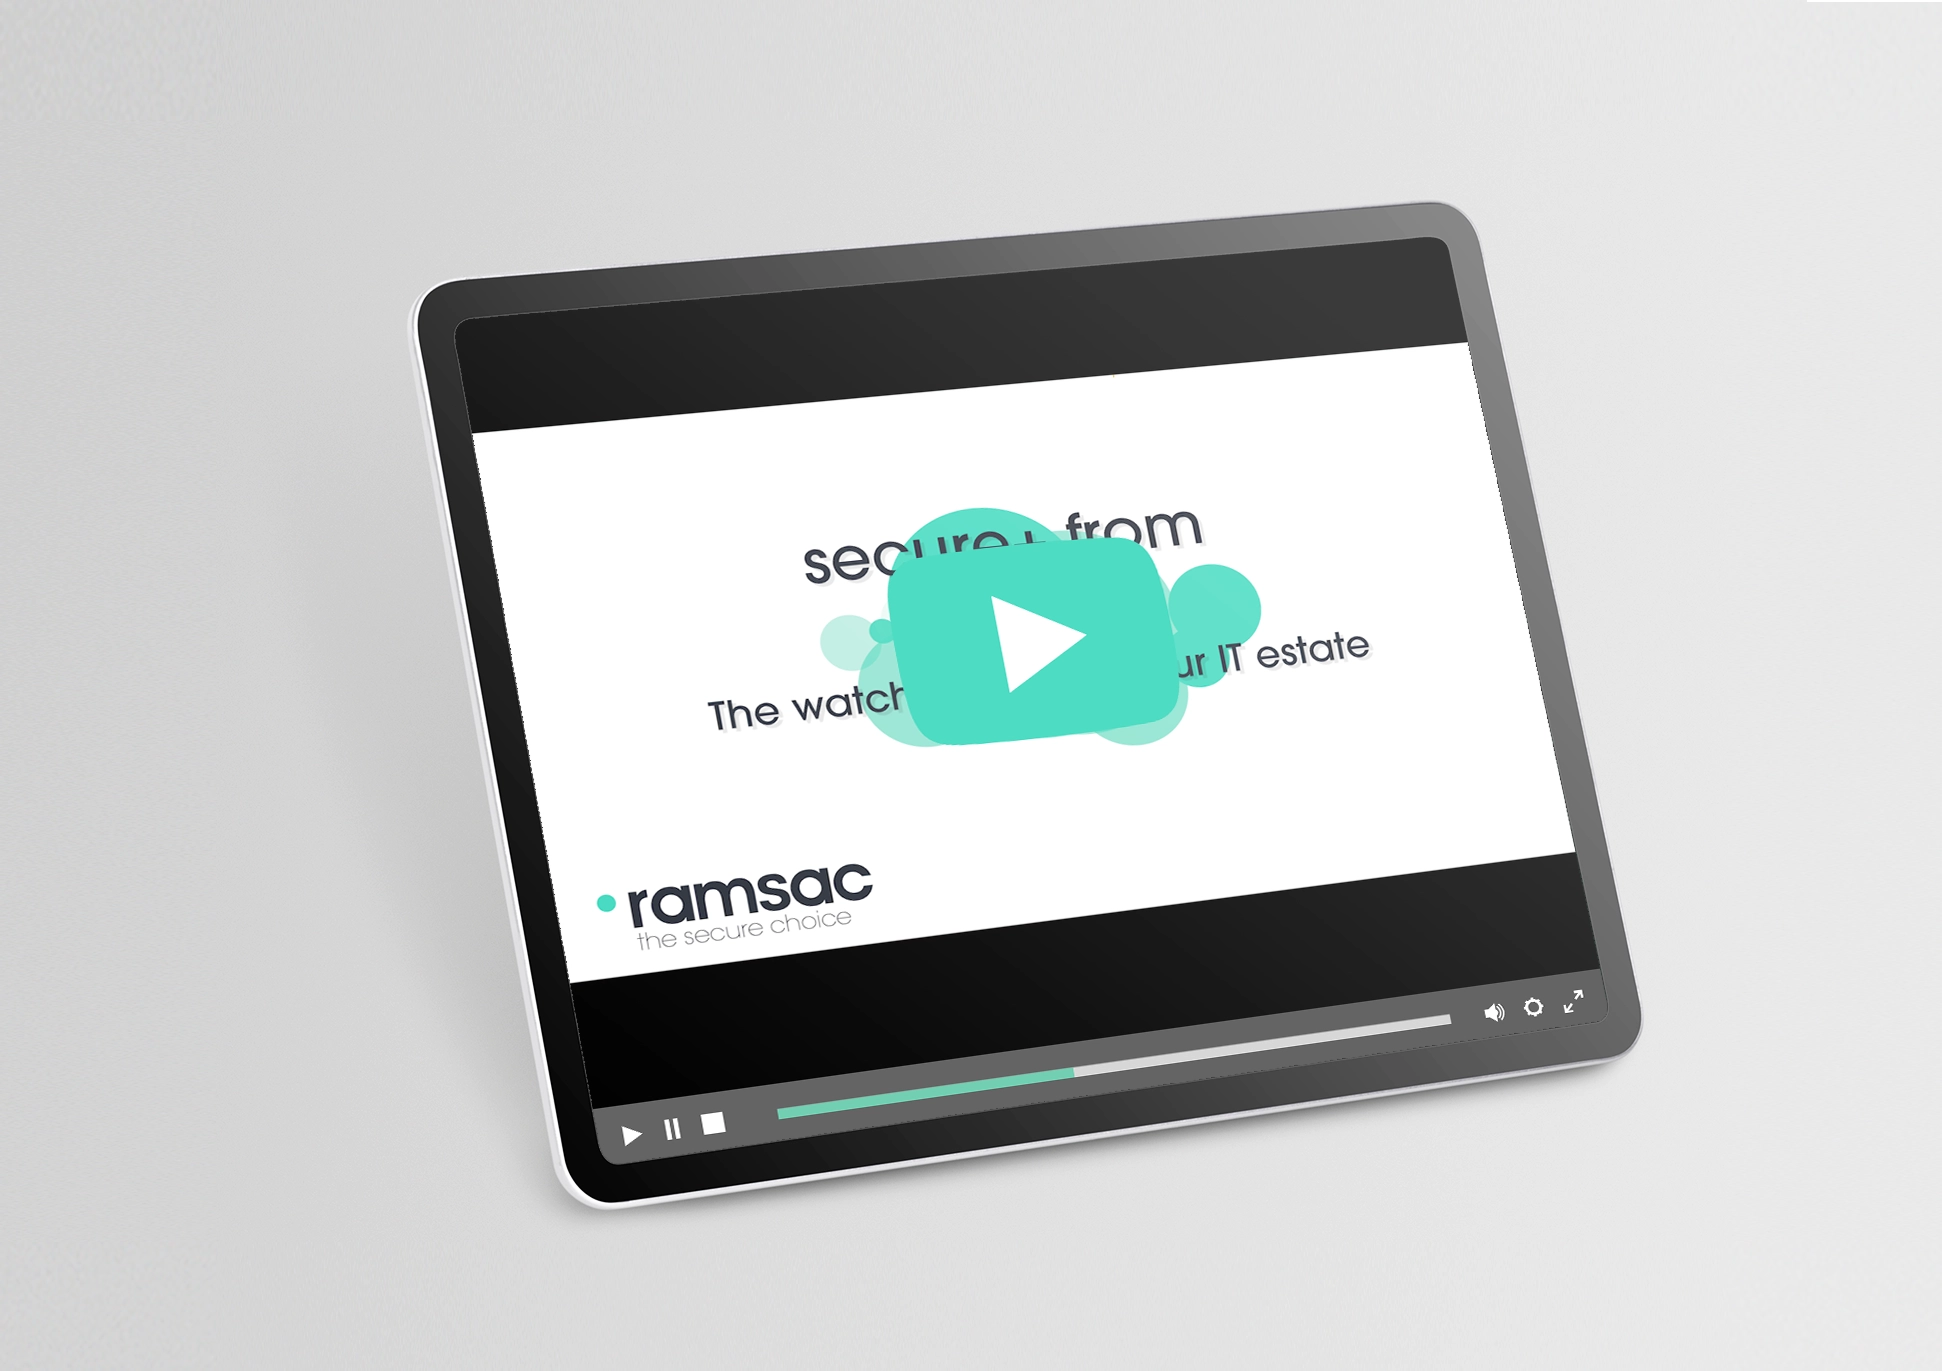 Video: Introducing secure+ from ramsac